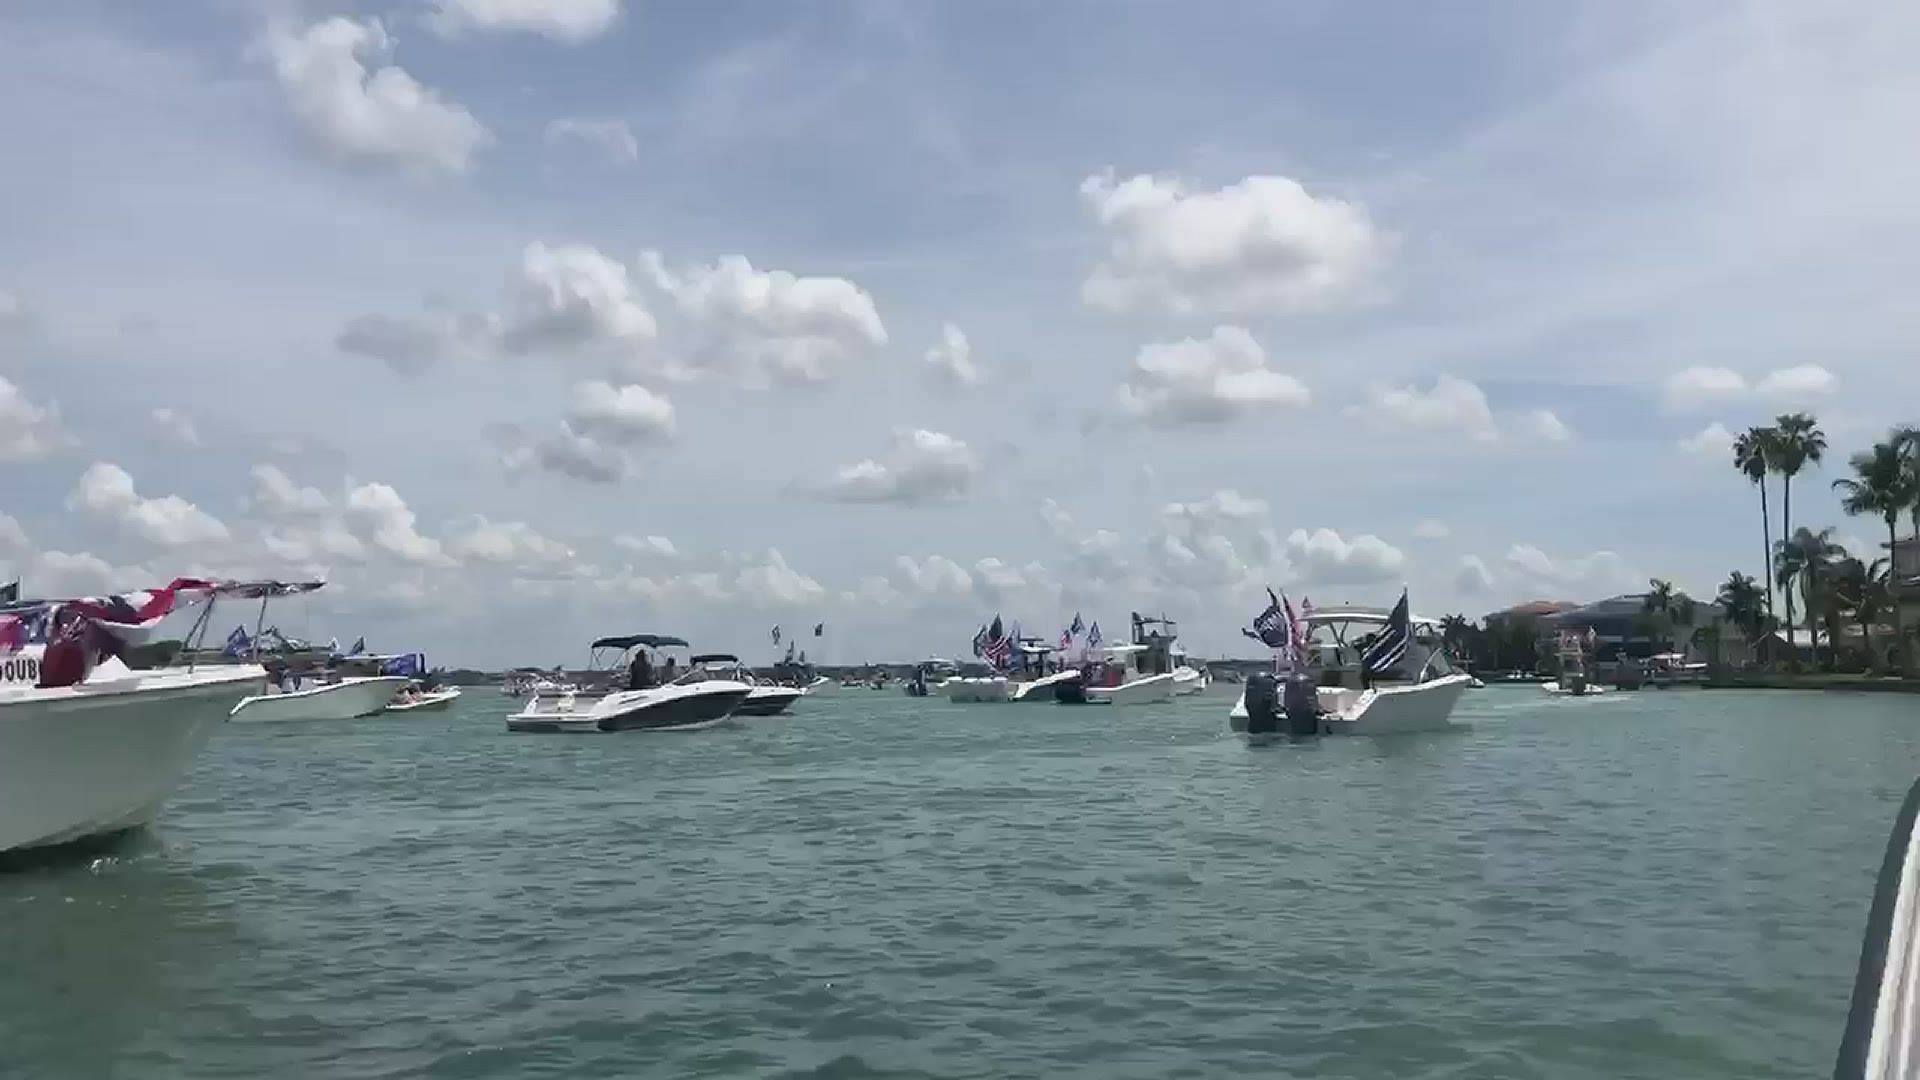 Just about every boat Saturday afternoon had an American flag or one in support of President Donald Trump -- and most had both.